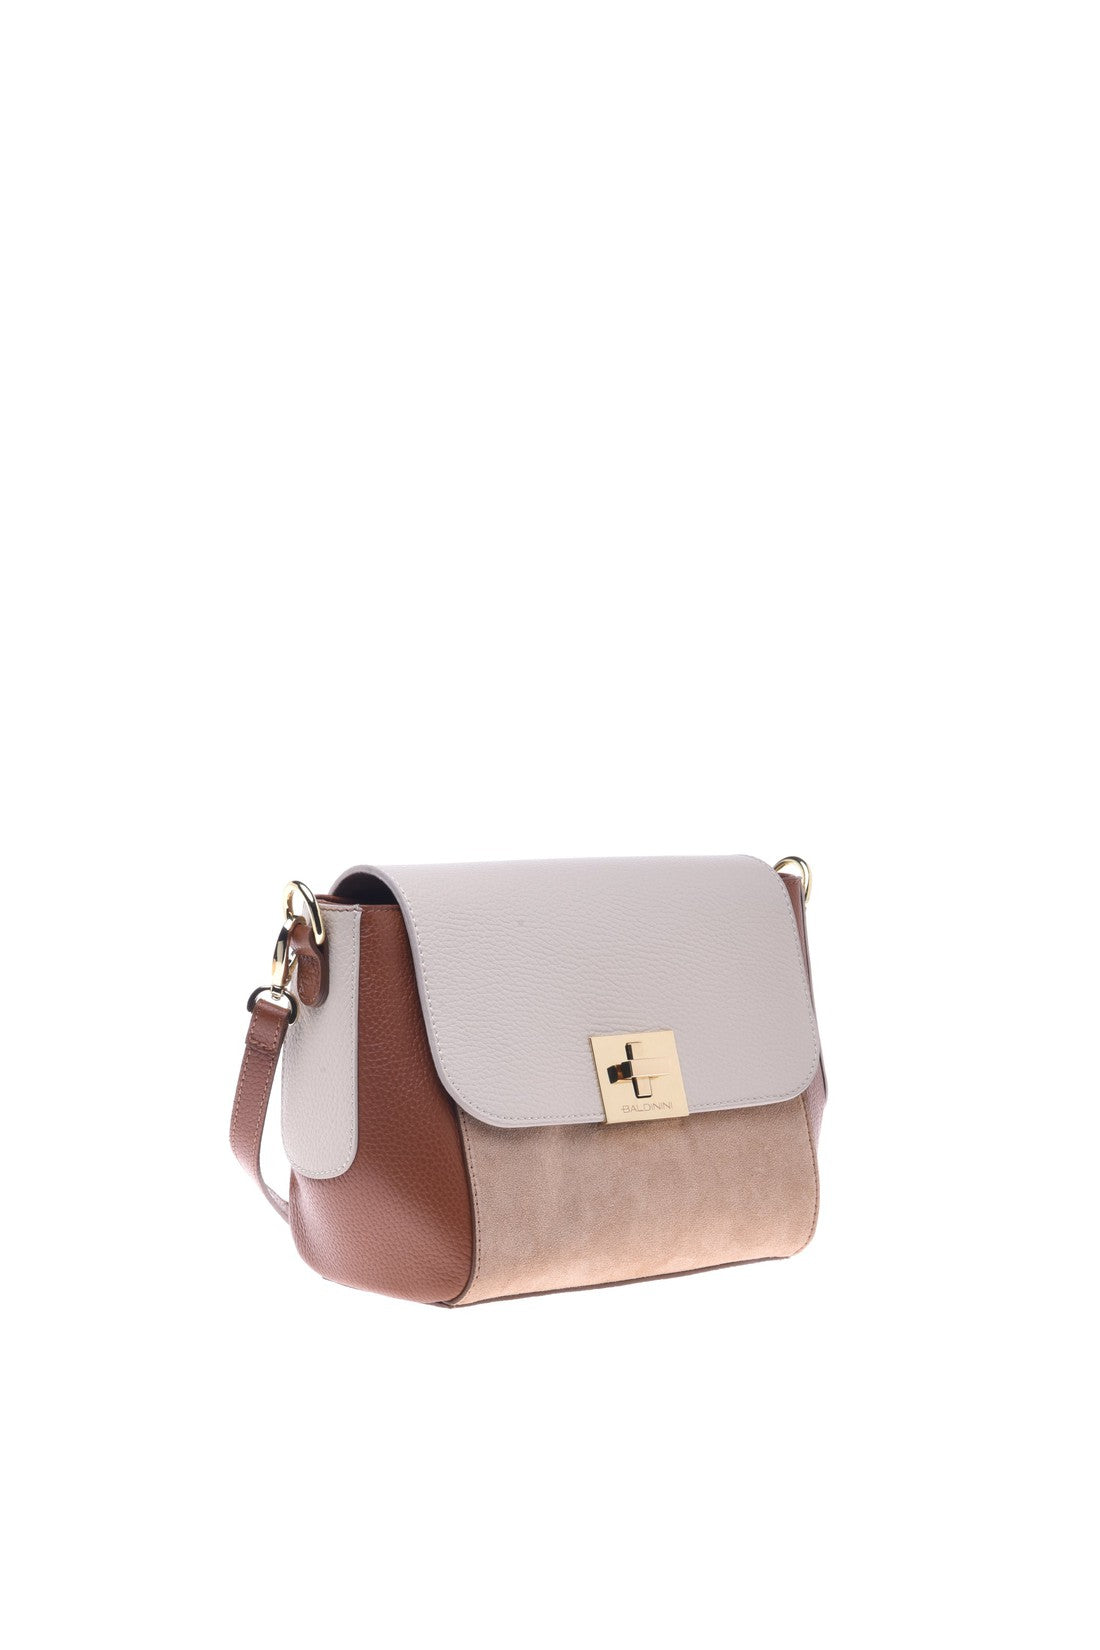 Crossbody bag in tan and beige calfskin and suede